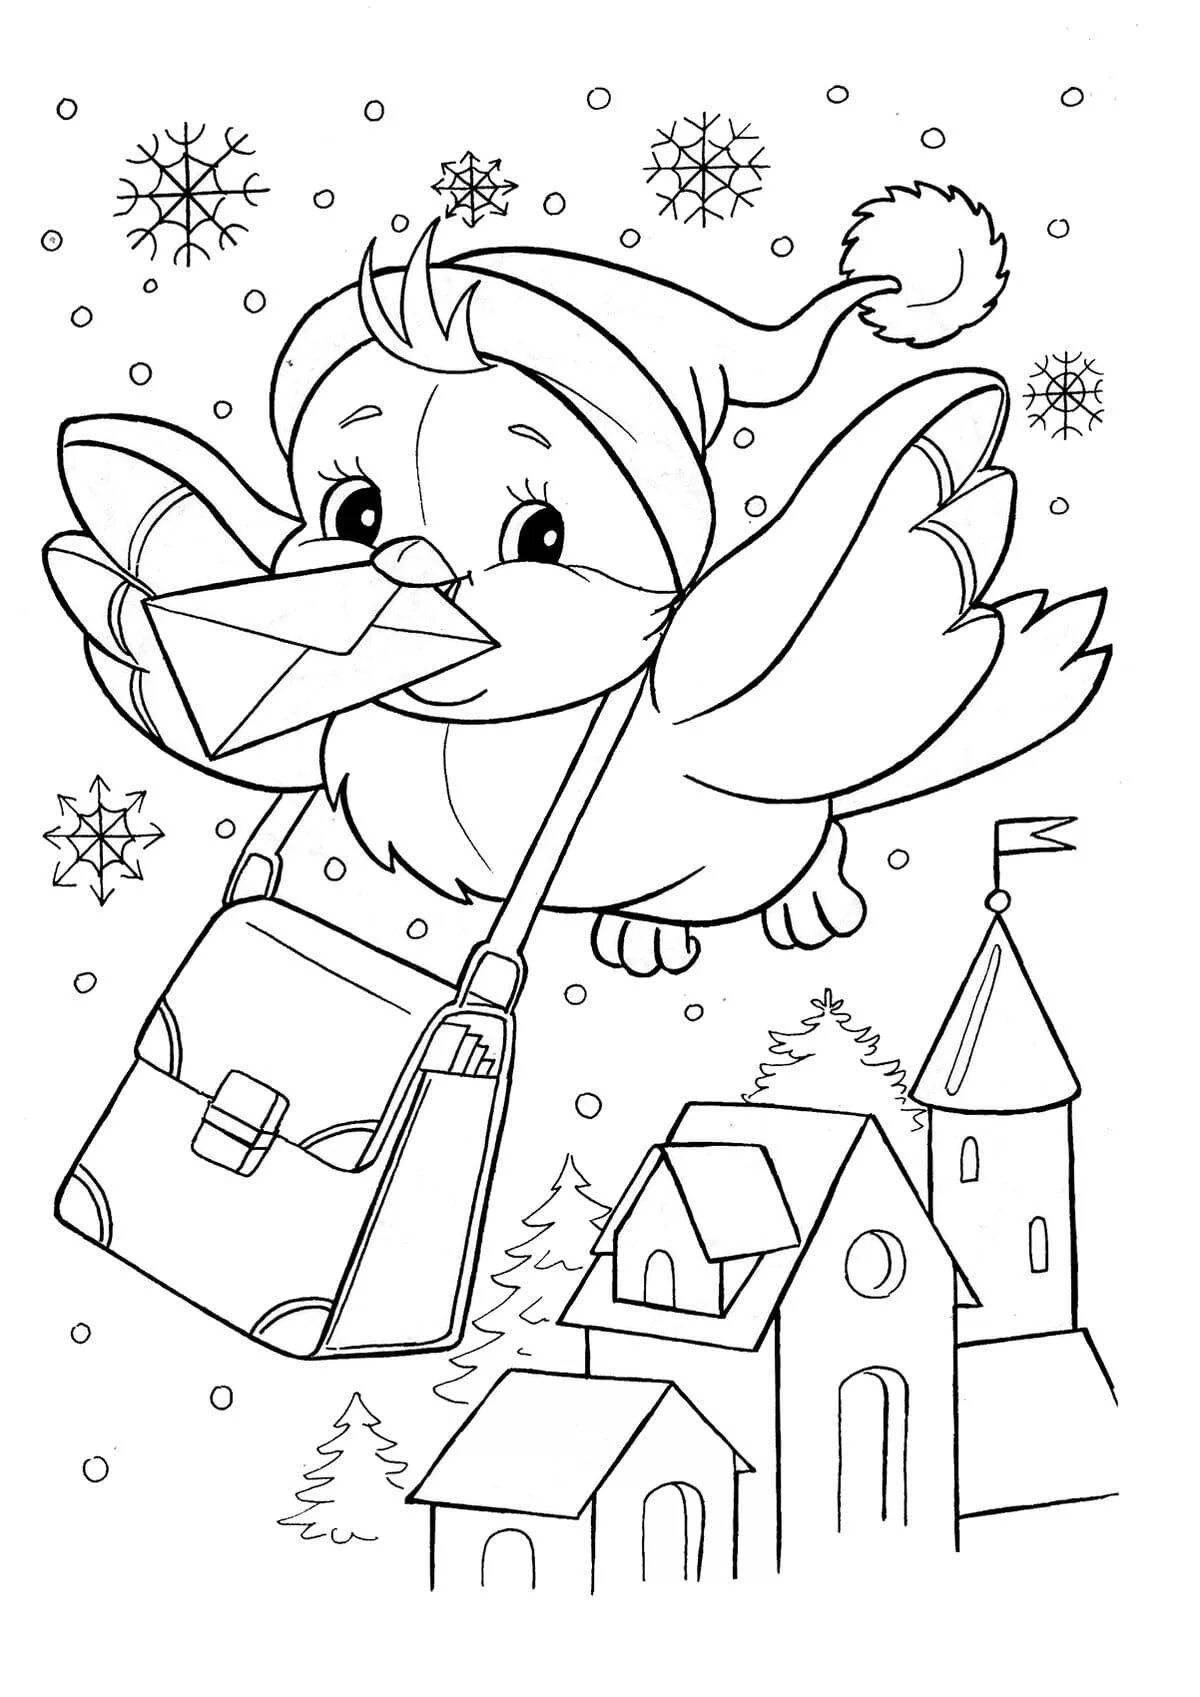 Fantastic winter coloring book for kids 3-4 years old